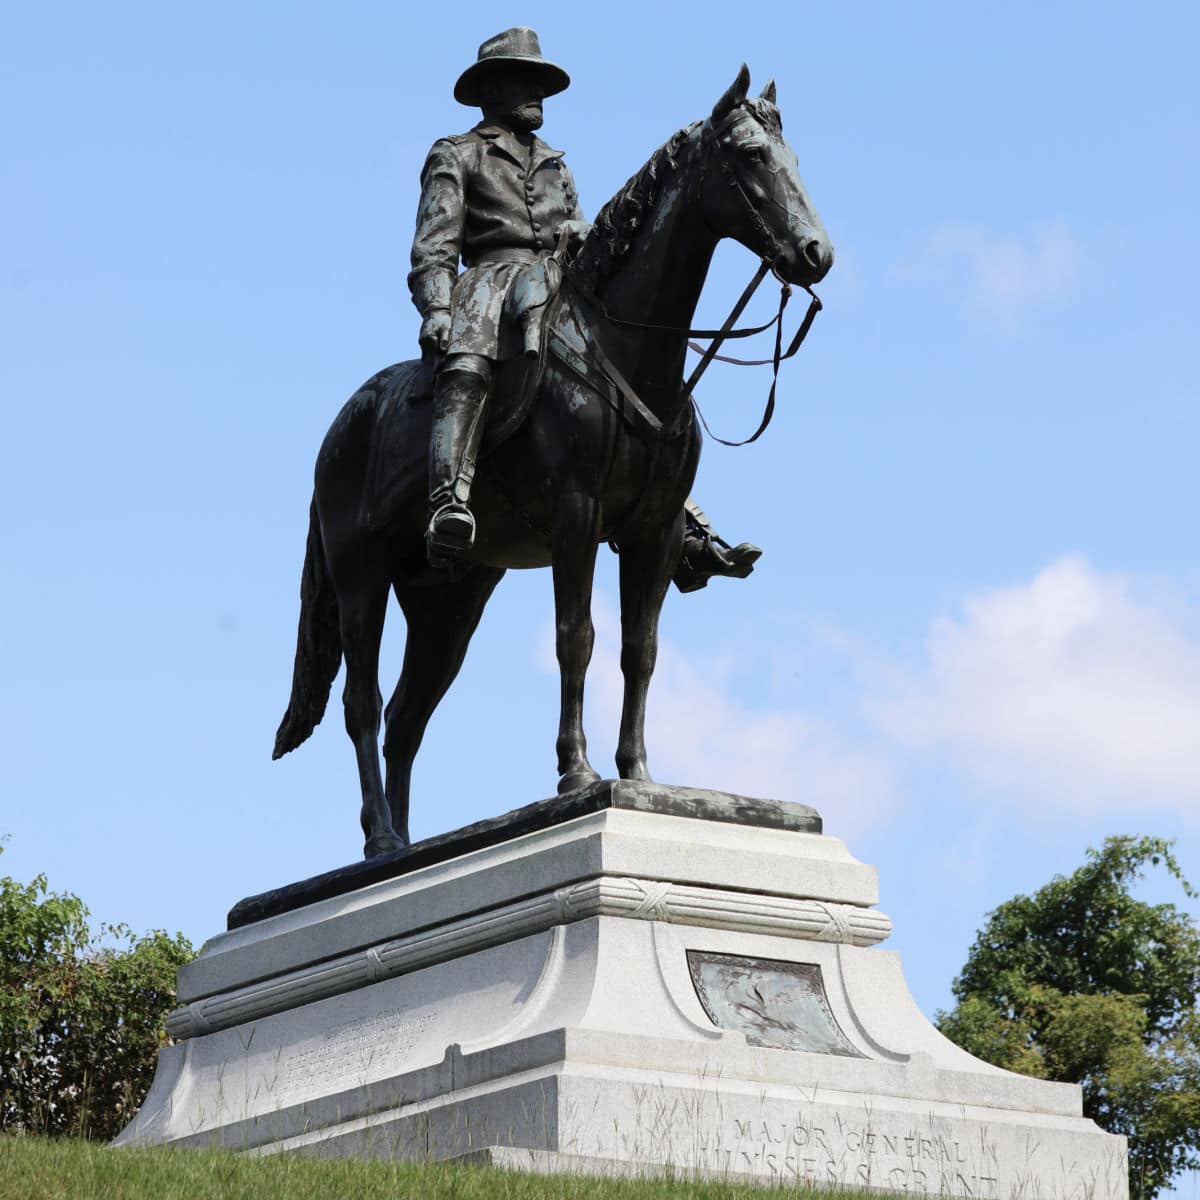 Monument of Ulysses S Grant on a Horse at Vicksburg National Military Park